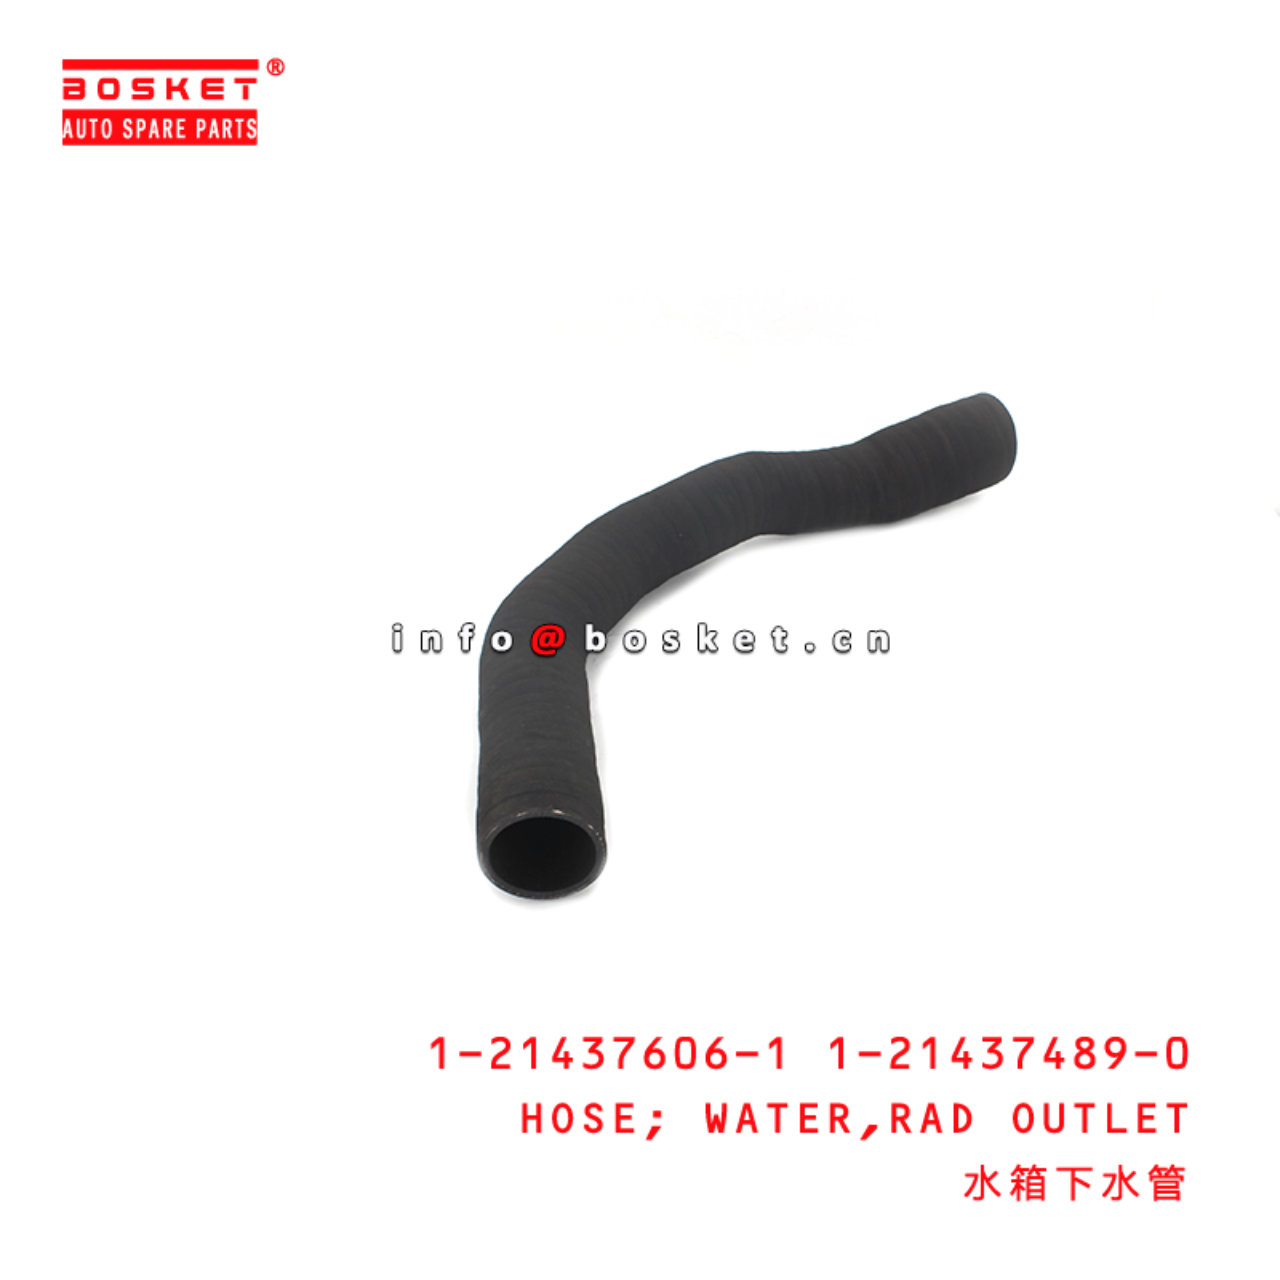 1-21437606-1 1-21437489-0 Radiator Outlet Water Hose 1214376061 1214374890 Suitable for ISUZU CXZ81 